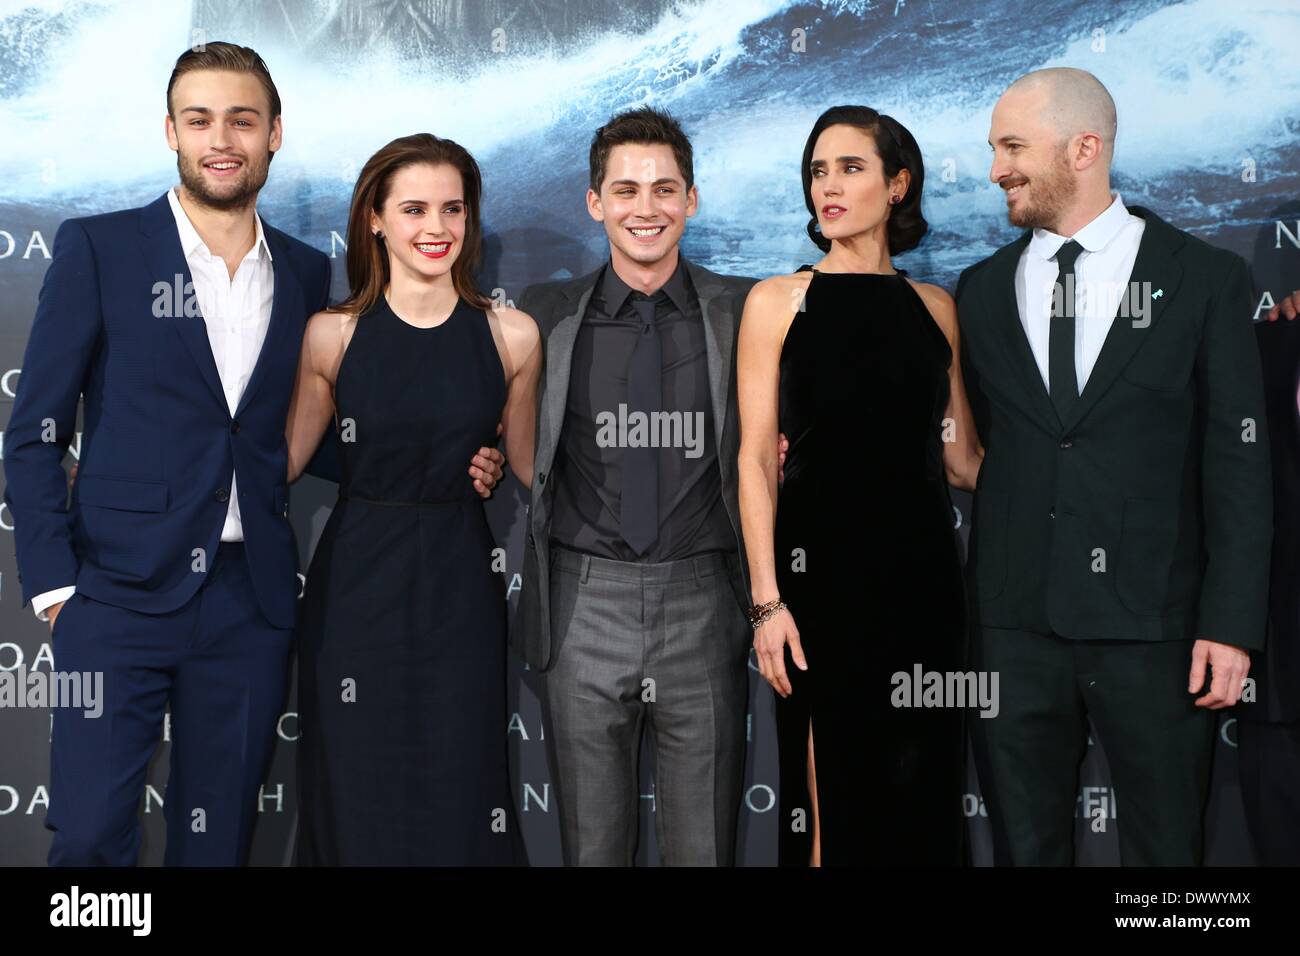 Douglas Booth, Emma Watson, Logan Lerman, Jennifer Connelly and film director Darren Aronofsky attend to the premiere of the Film 'Noah' at the Zoo Palast Movie Theater in Berlin, Germany on March 13, 2014. Stock Photo